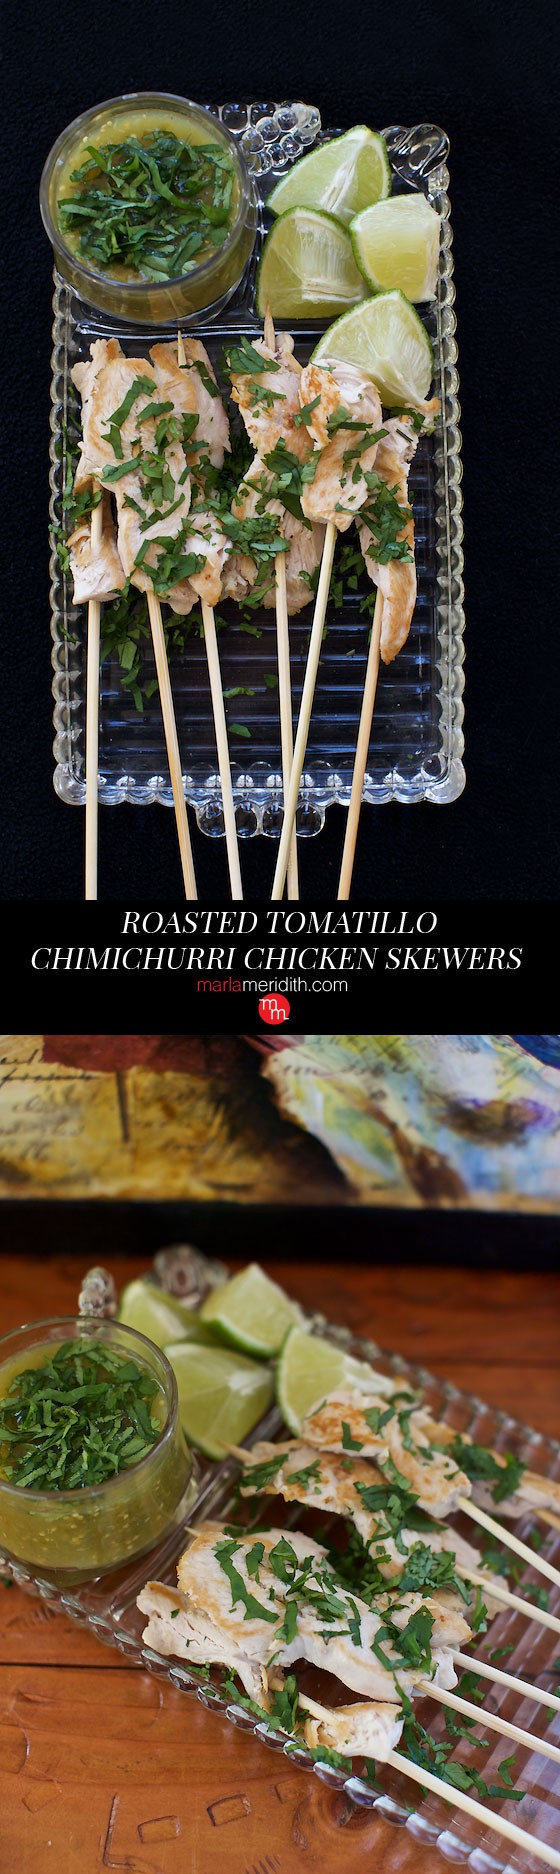 Roasted Tomatillo Chimichurri Chicken Skewers. Serve these up at your parties & celebrations! MarlaMeridith.com ( @marlameridith )